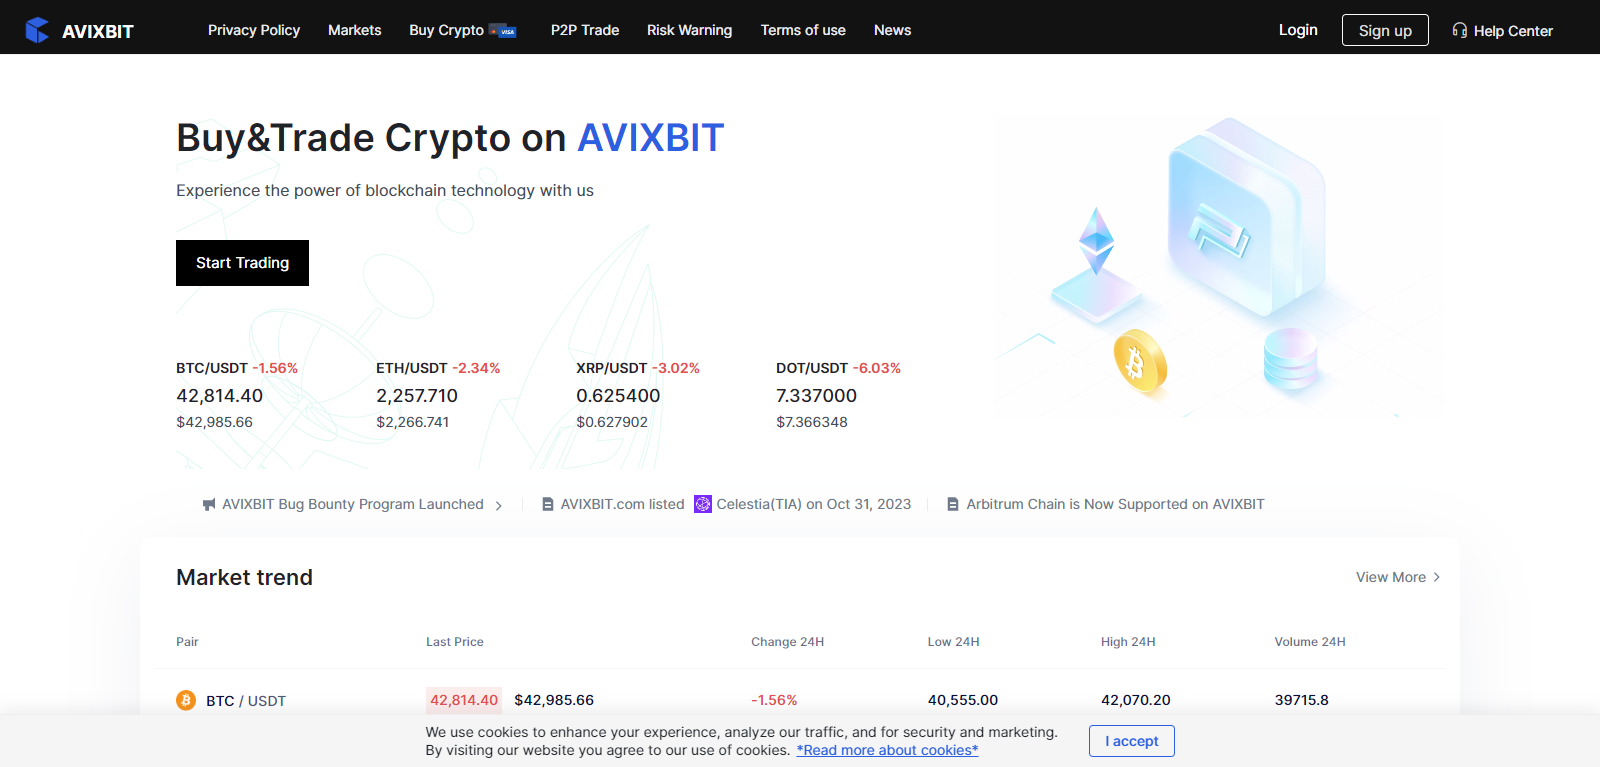 Is Avixbit.com Cryptocurrency Exchange Website Legit Or Scam? Find Out!